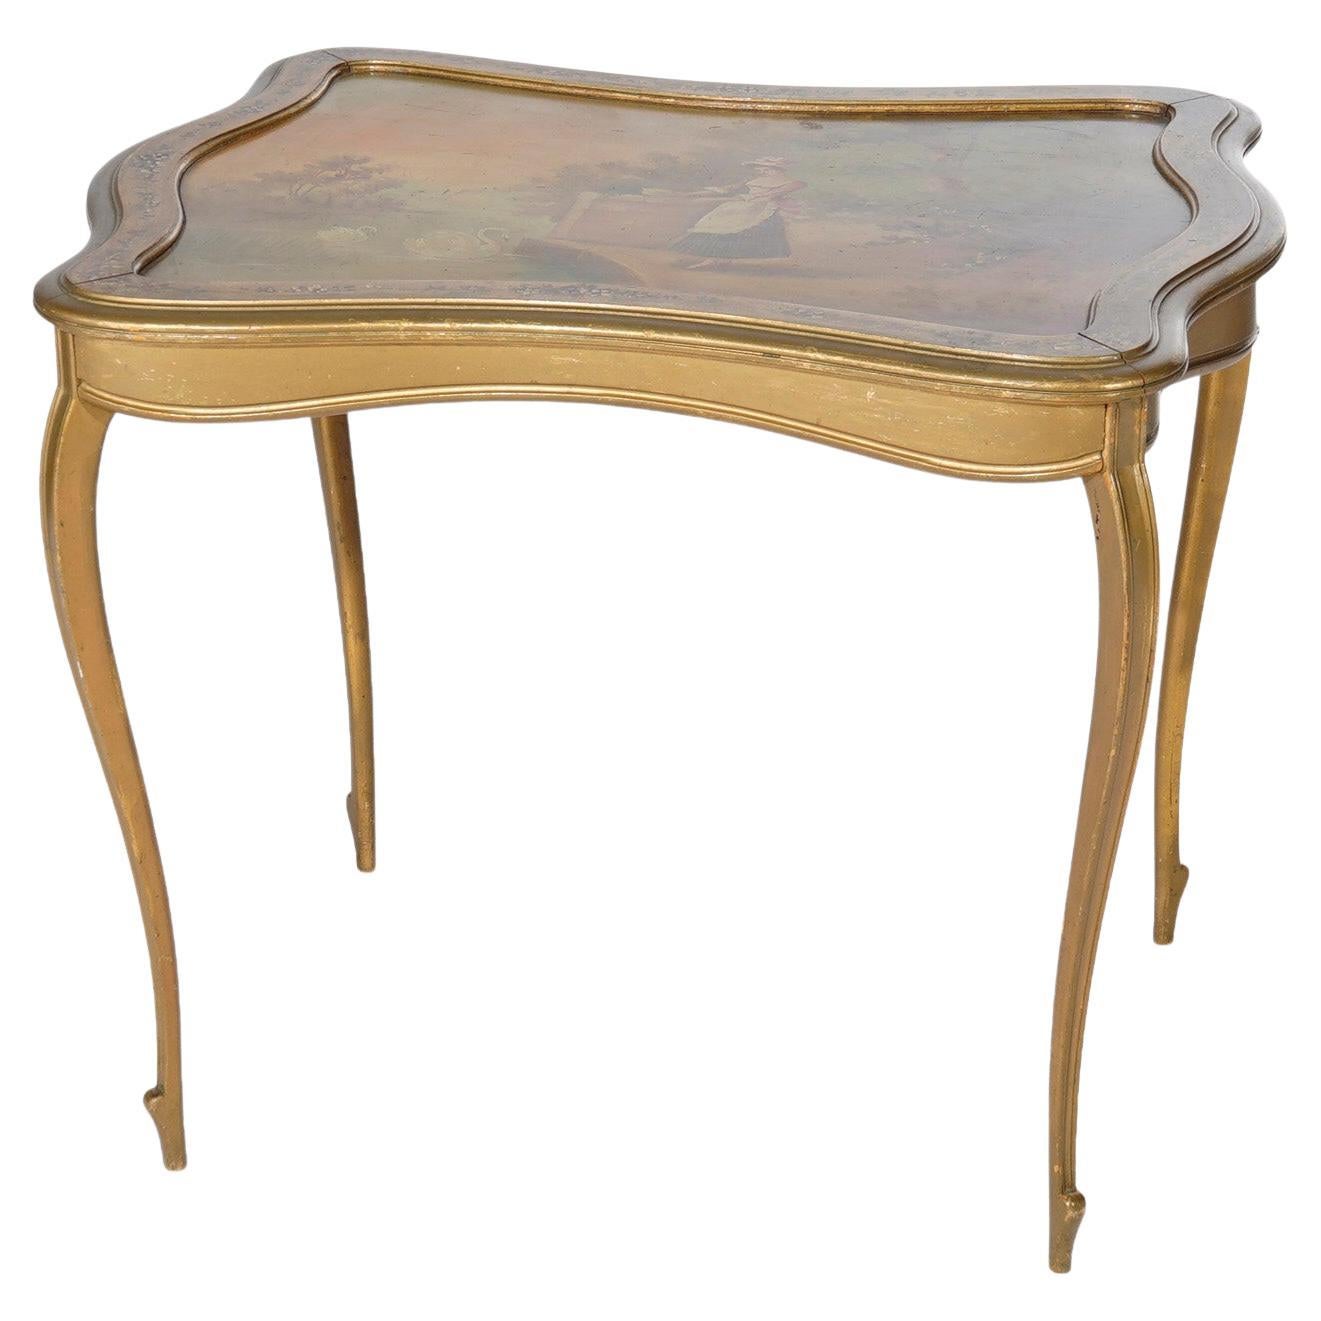 Antique French Vernis Martin Decorated Giltwood Table 19th C For Sale